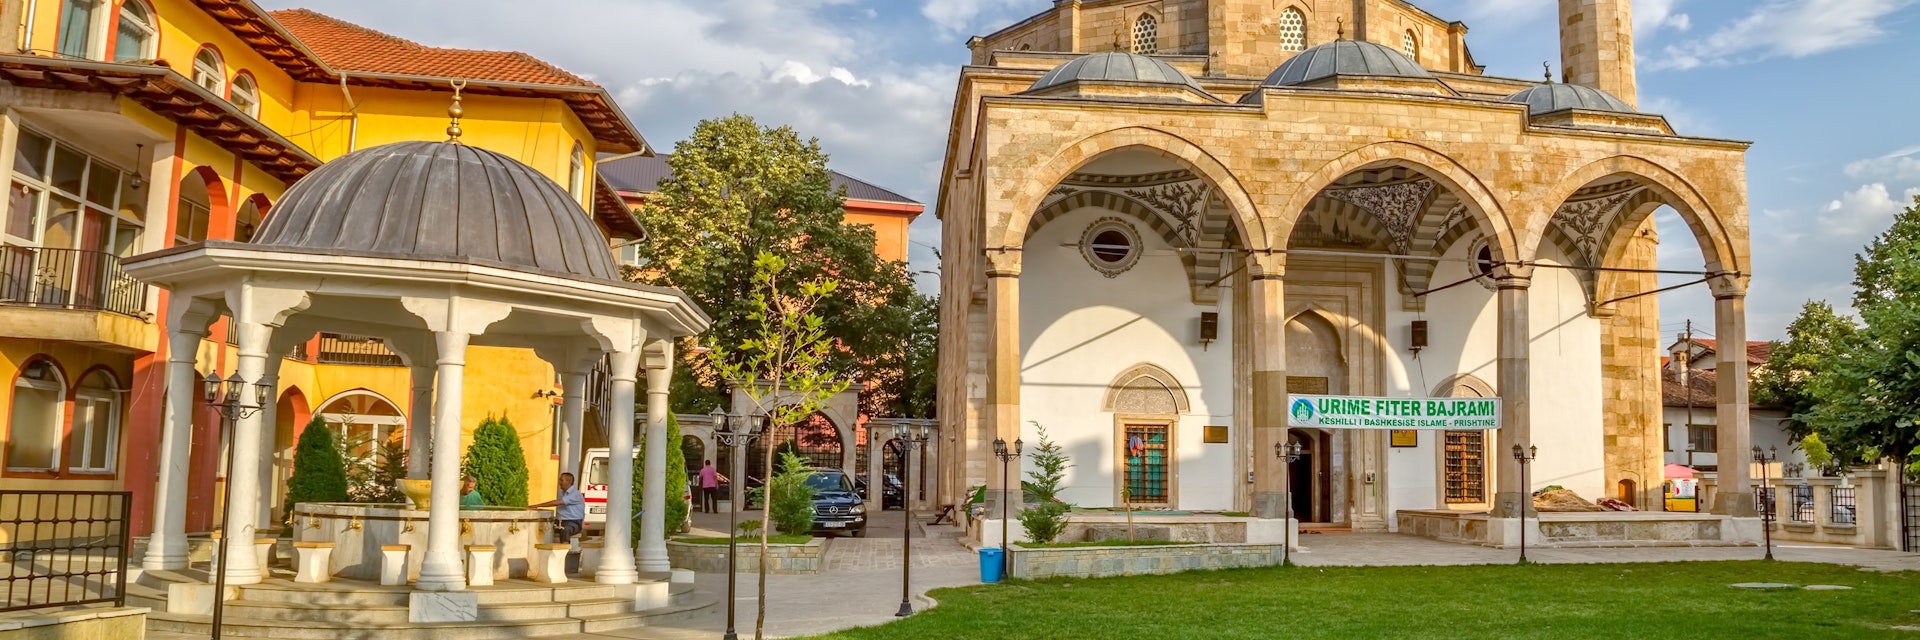 PRISTINA, KOSOVO - JULY 29, 2014: Fatih Mosque is the main city mosque and it is located in the center of the old town. Islam is the main religion in Kosovo.; Shutterstock ID 214757011